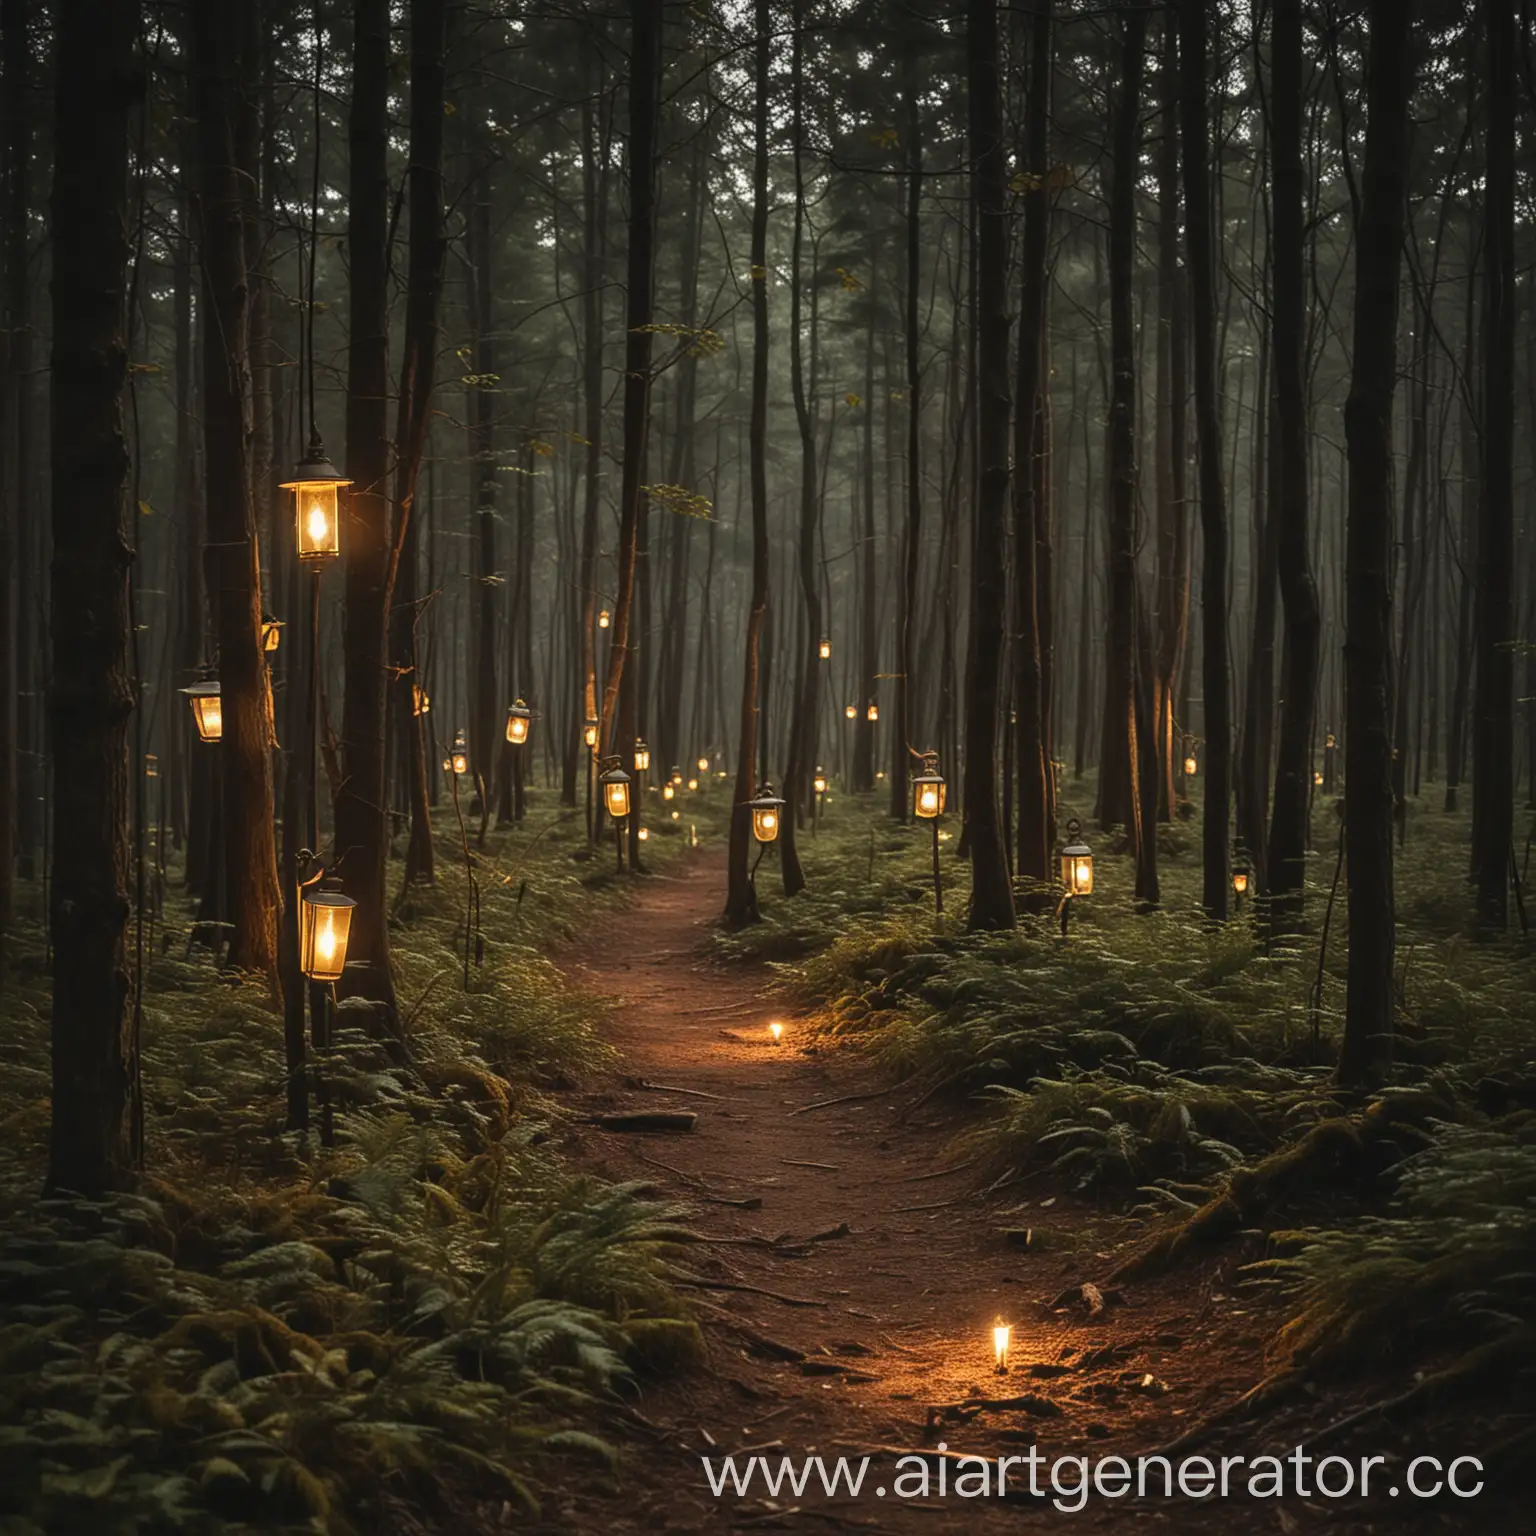 Enchanted-Forest-with-Illuminated-Lamps